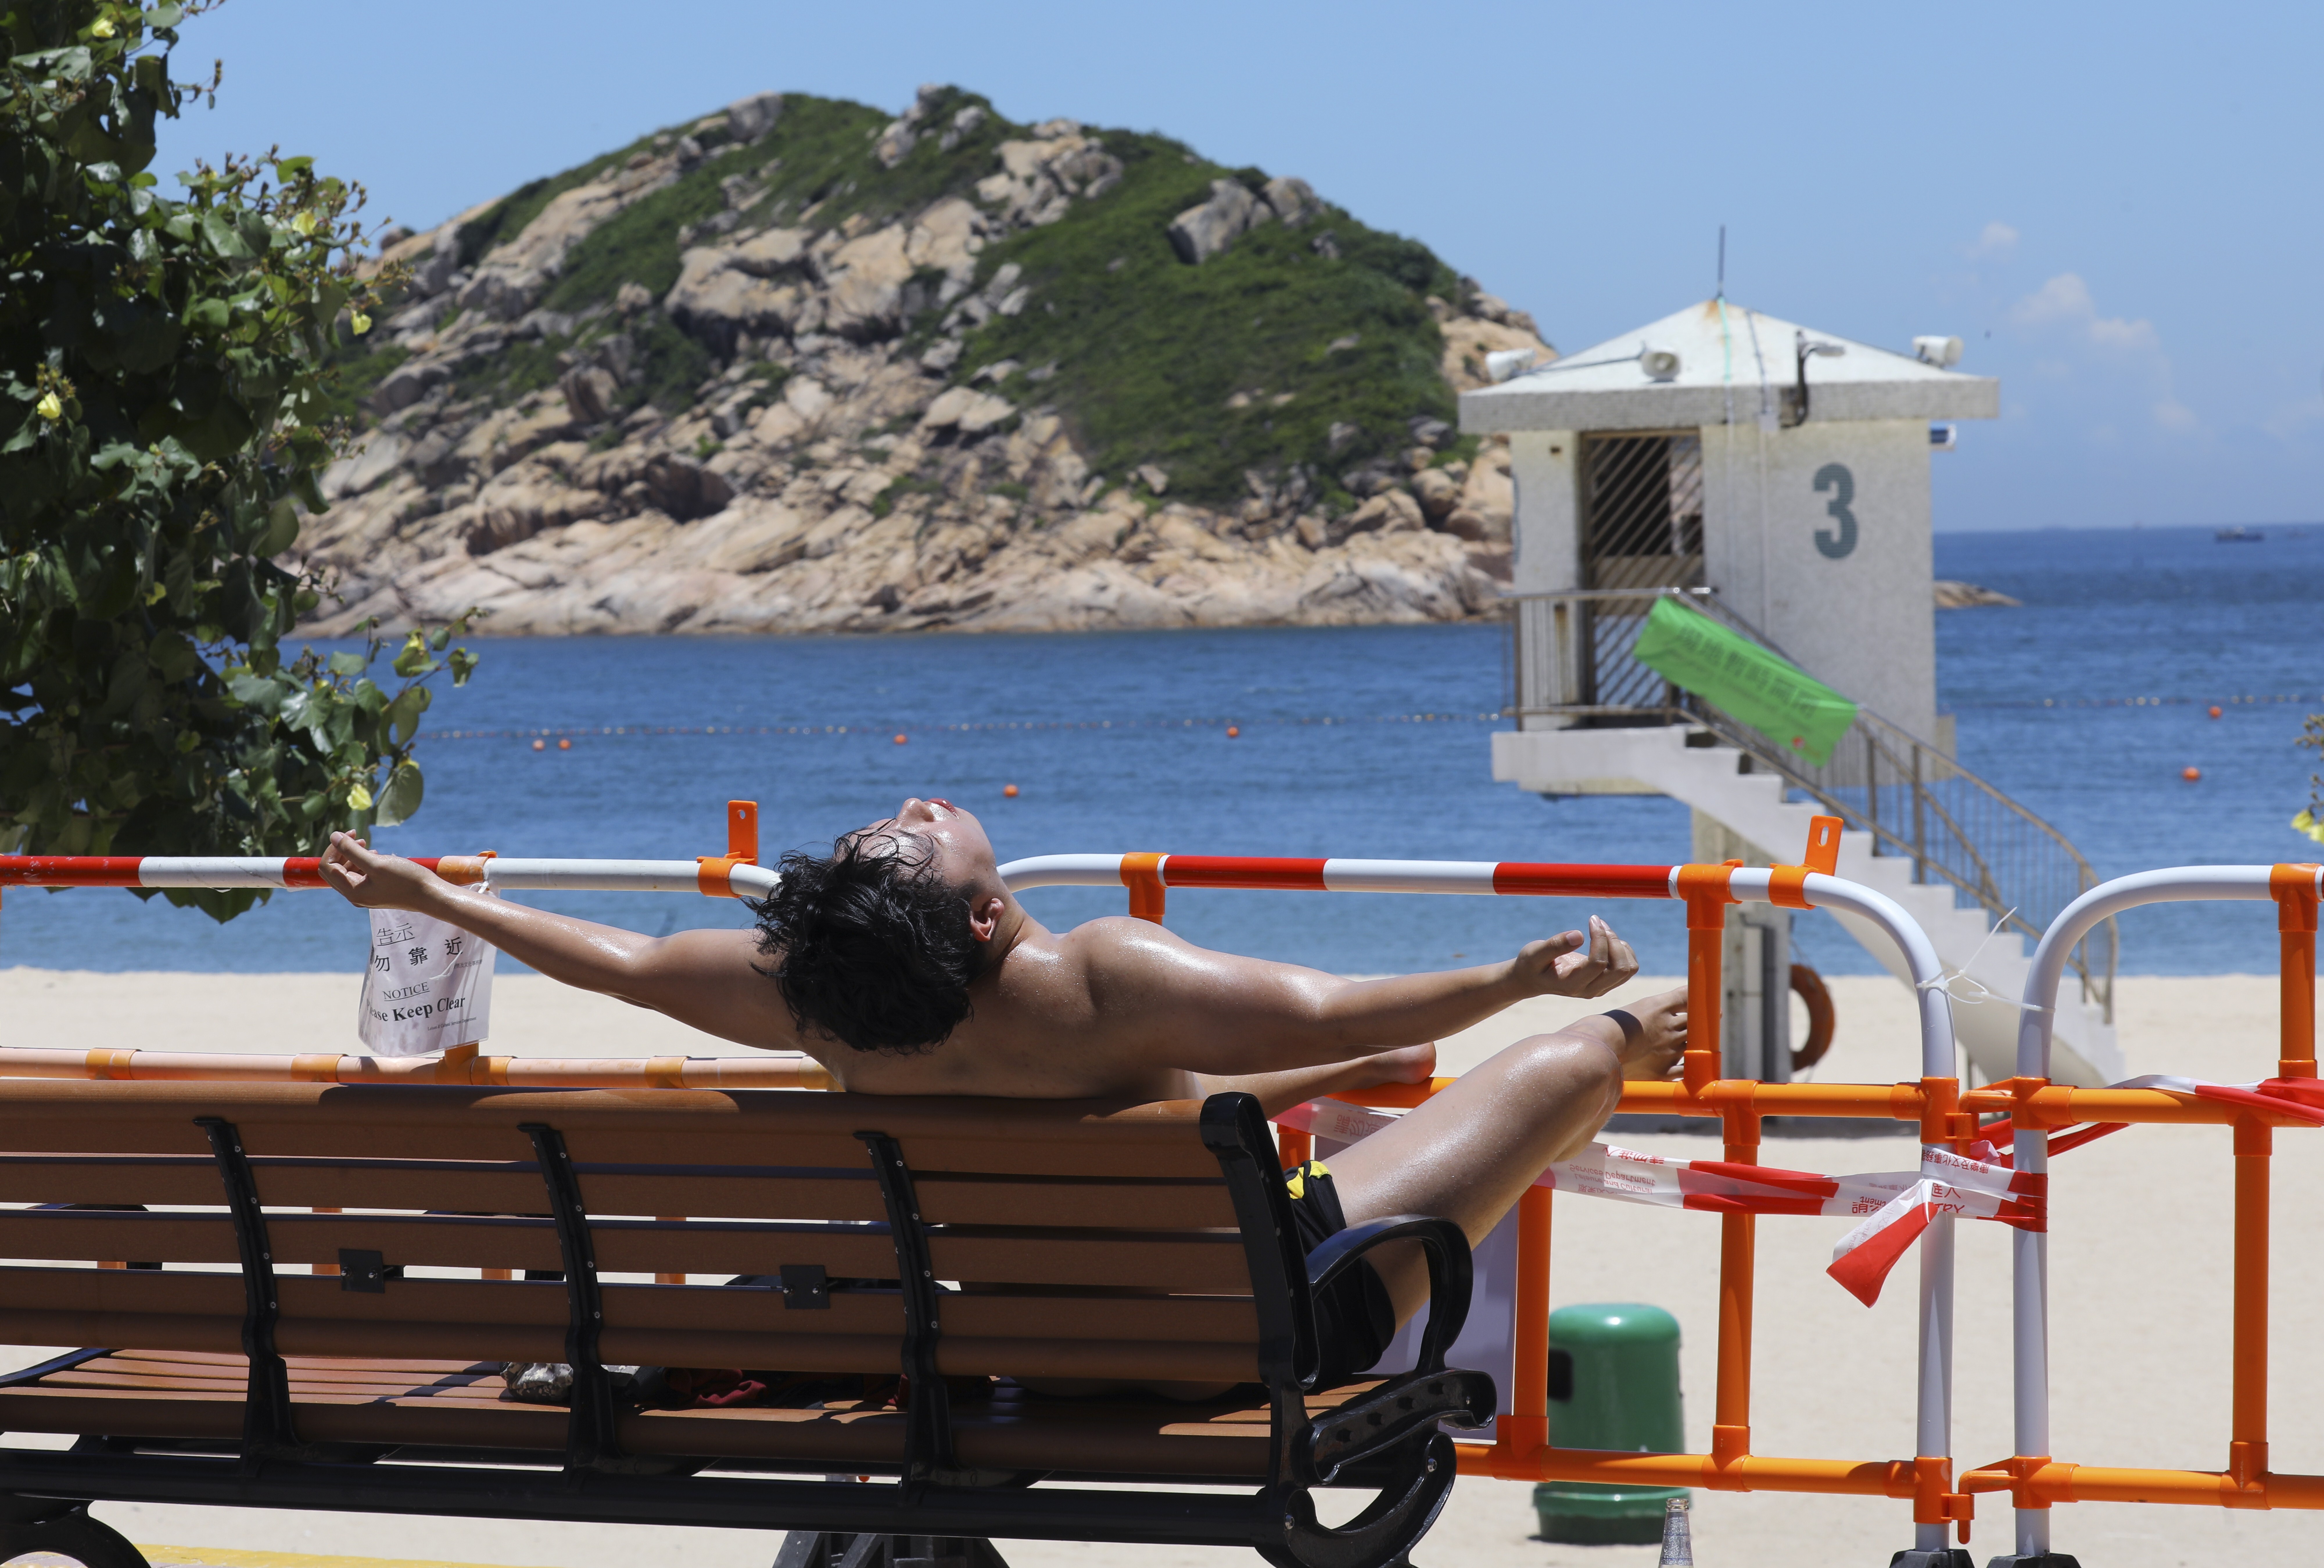 A man sunbathes behind the barricades at Shek O beach on July 26, days after Hong Kong’s beaches were closed. Photo: SCMP / Dickson Lee